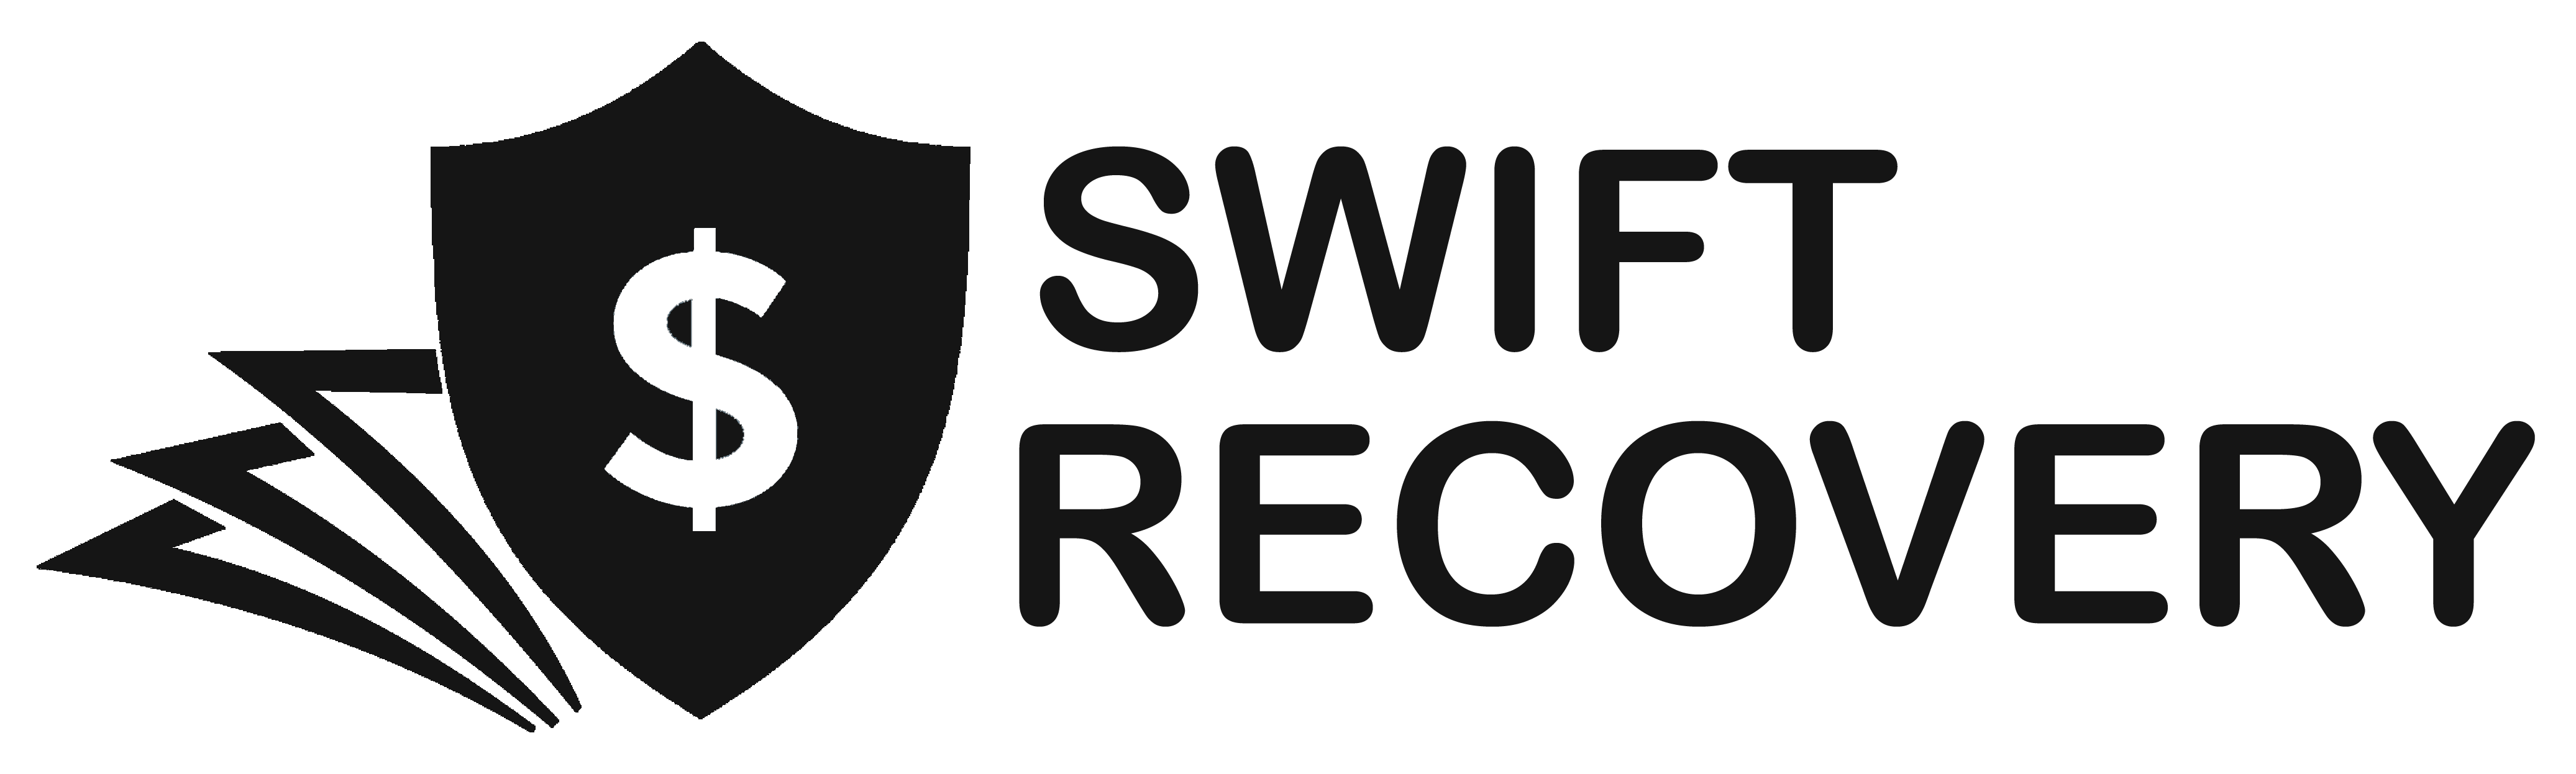 SWIFT RECOVERY